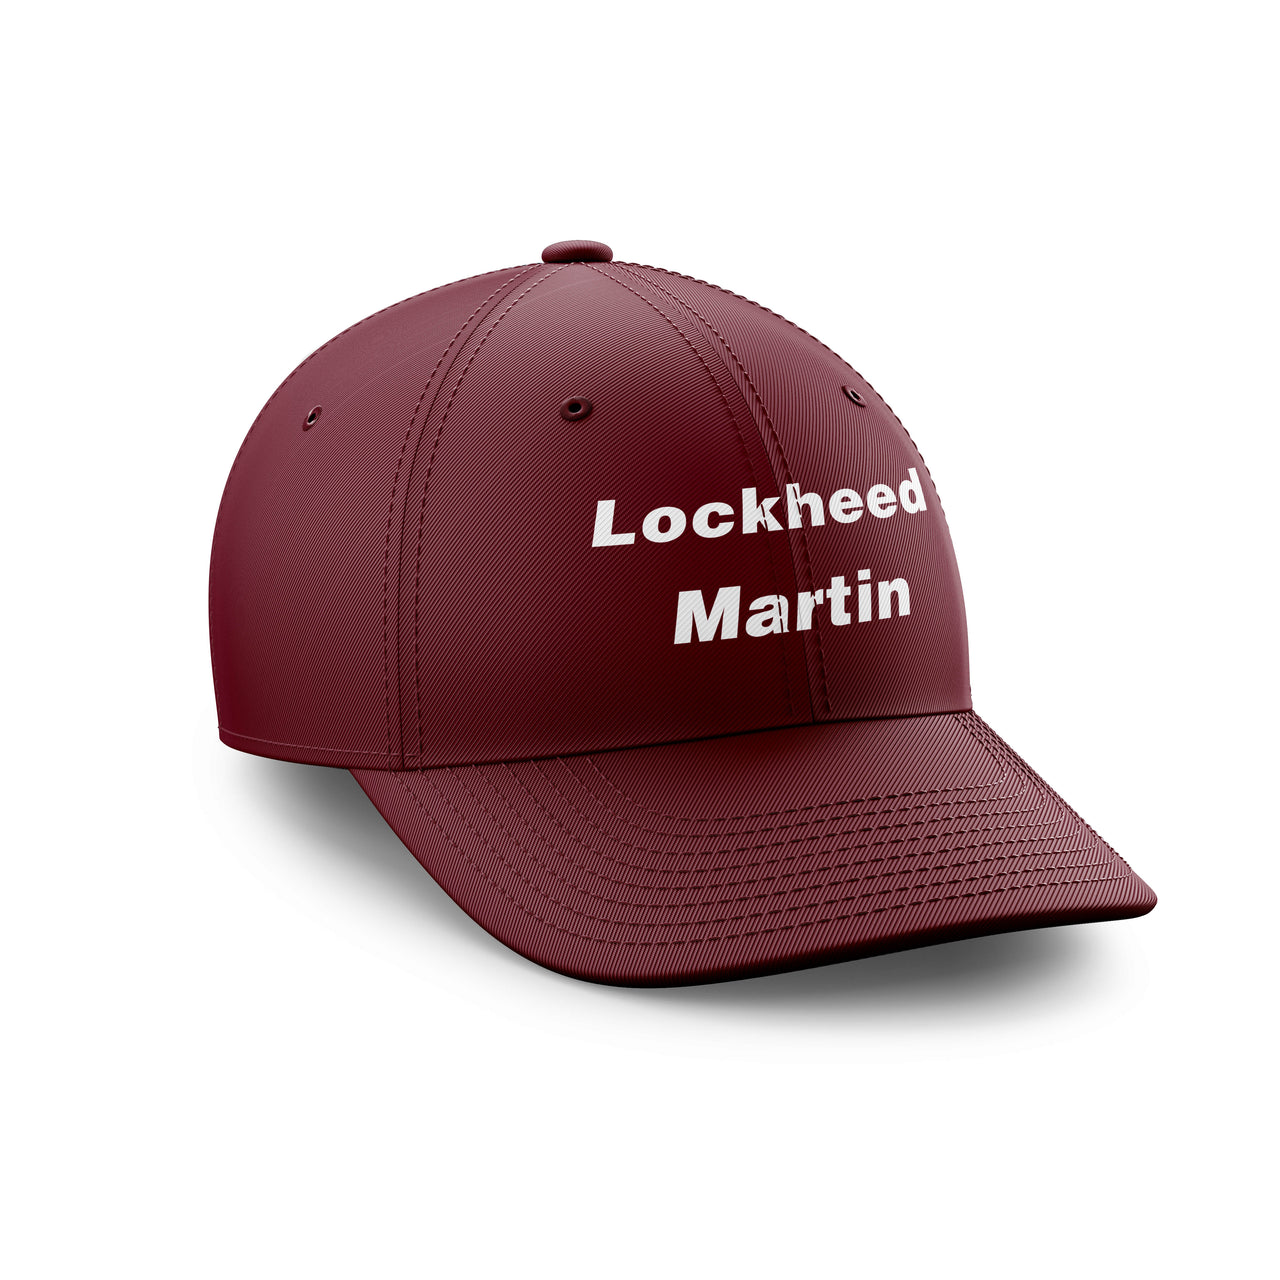 Lockheed Martin & Text Designed Embroidered Hats